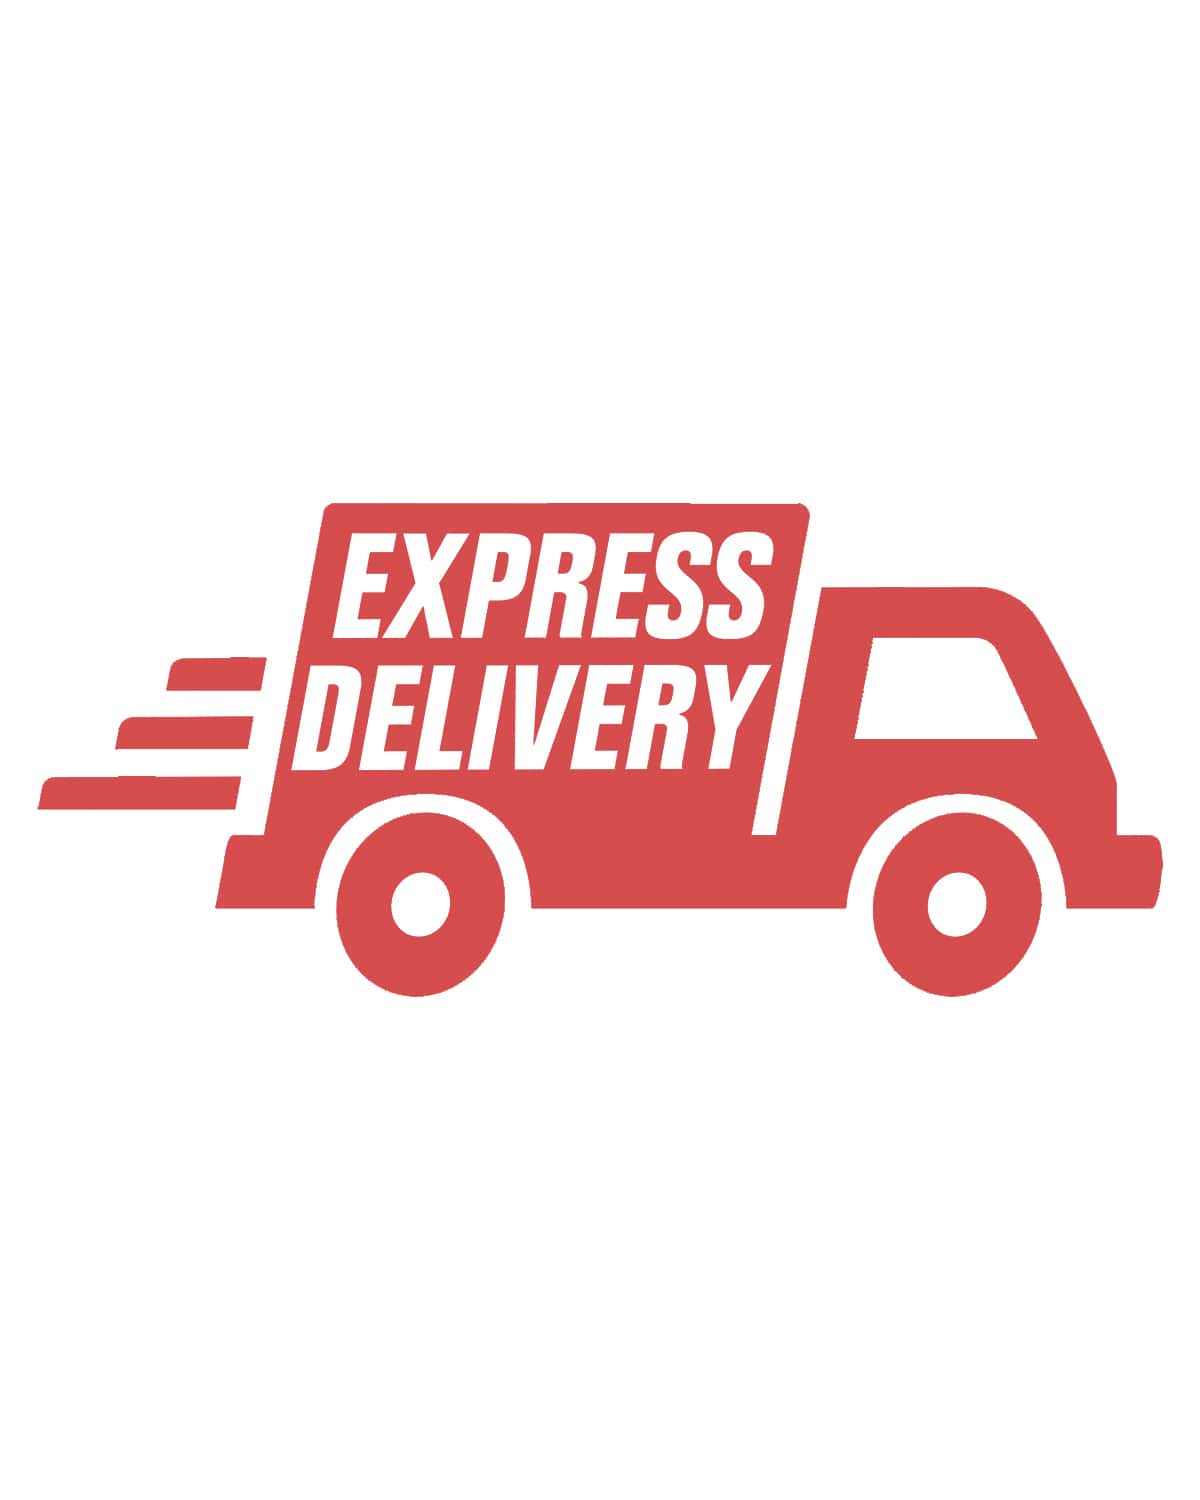 Express Delivery (3-7 Days) - ASDF Print